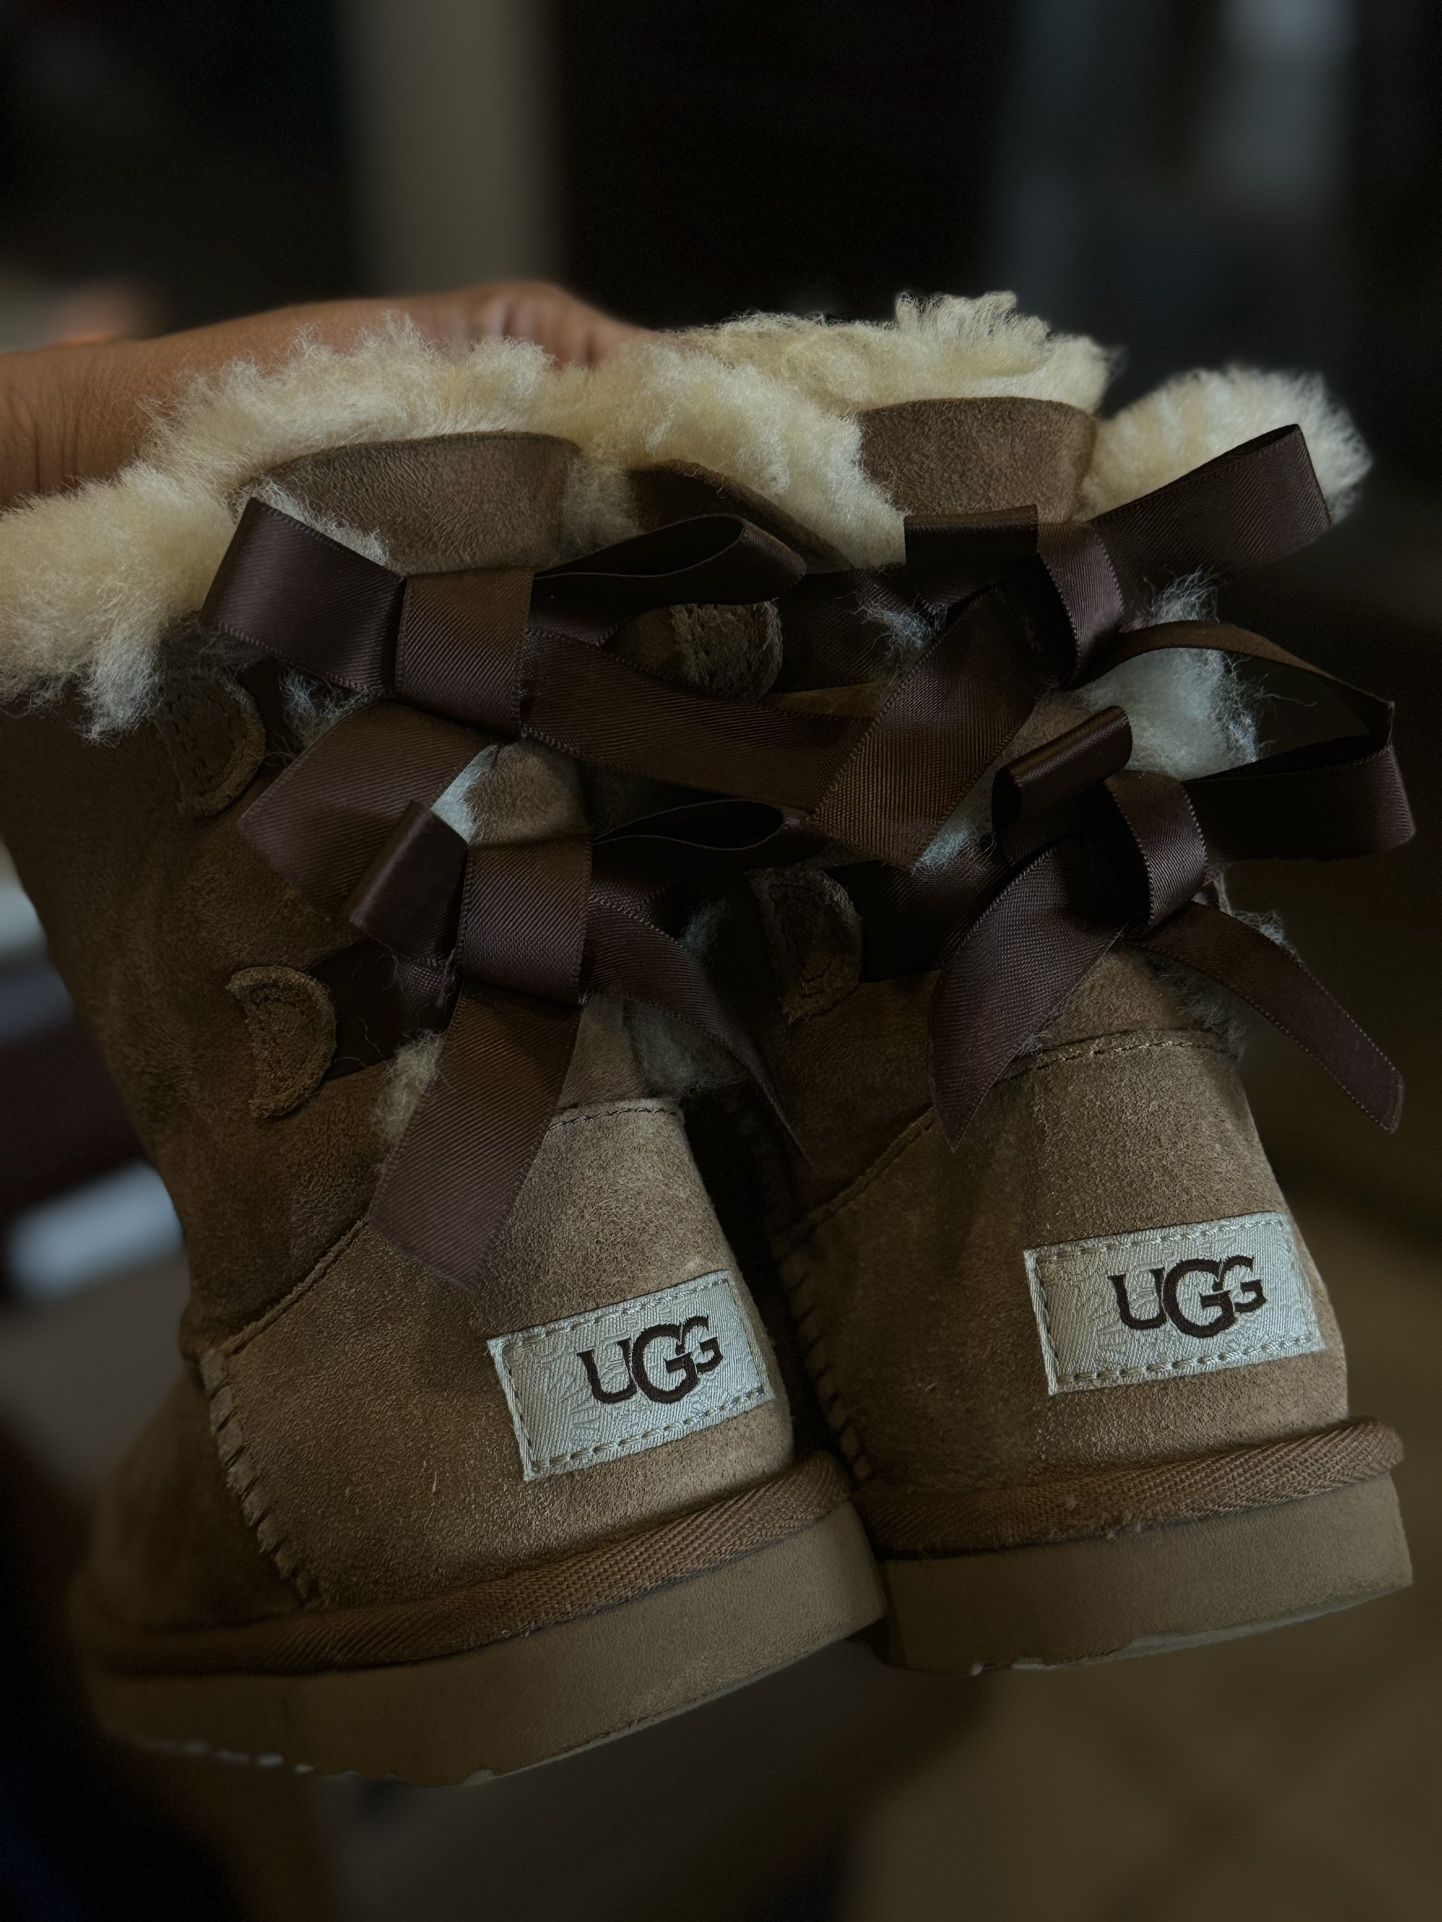 Ugg Boots in Chestnut - Toddler Size 11